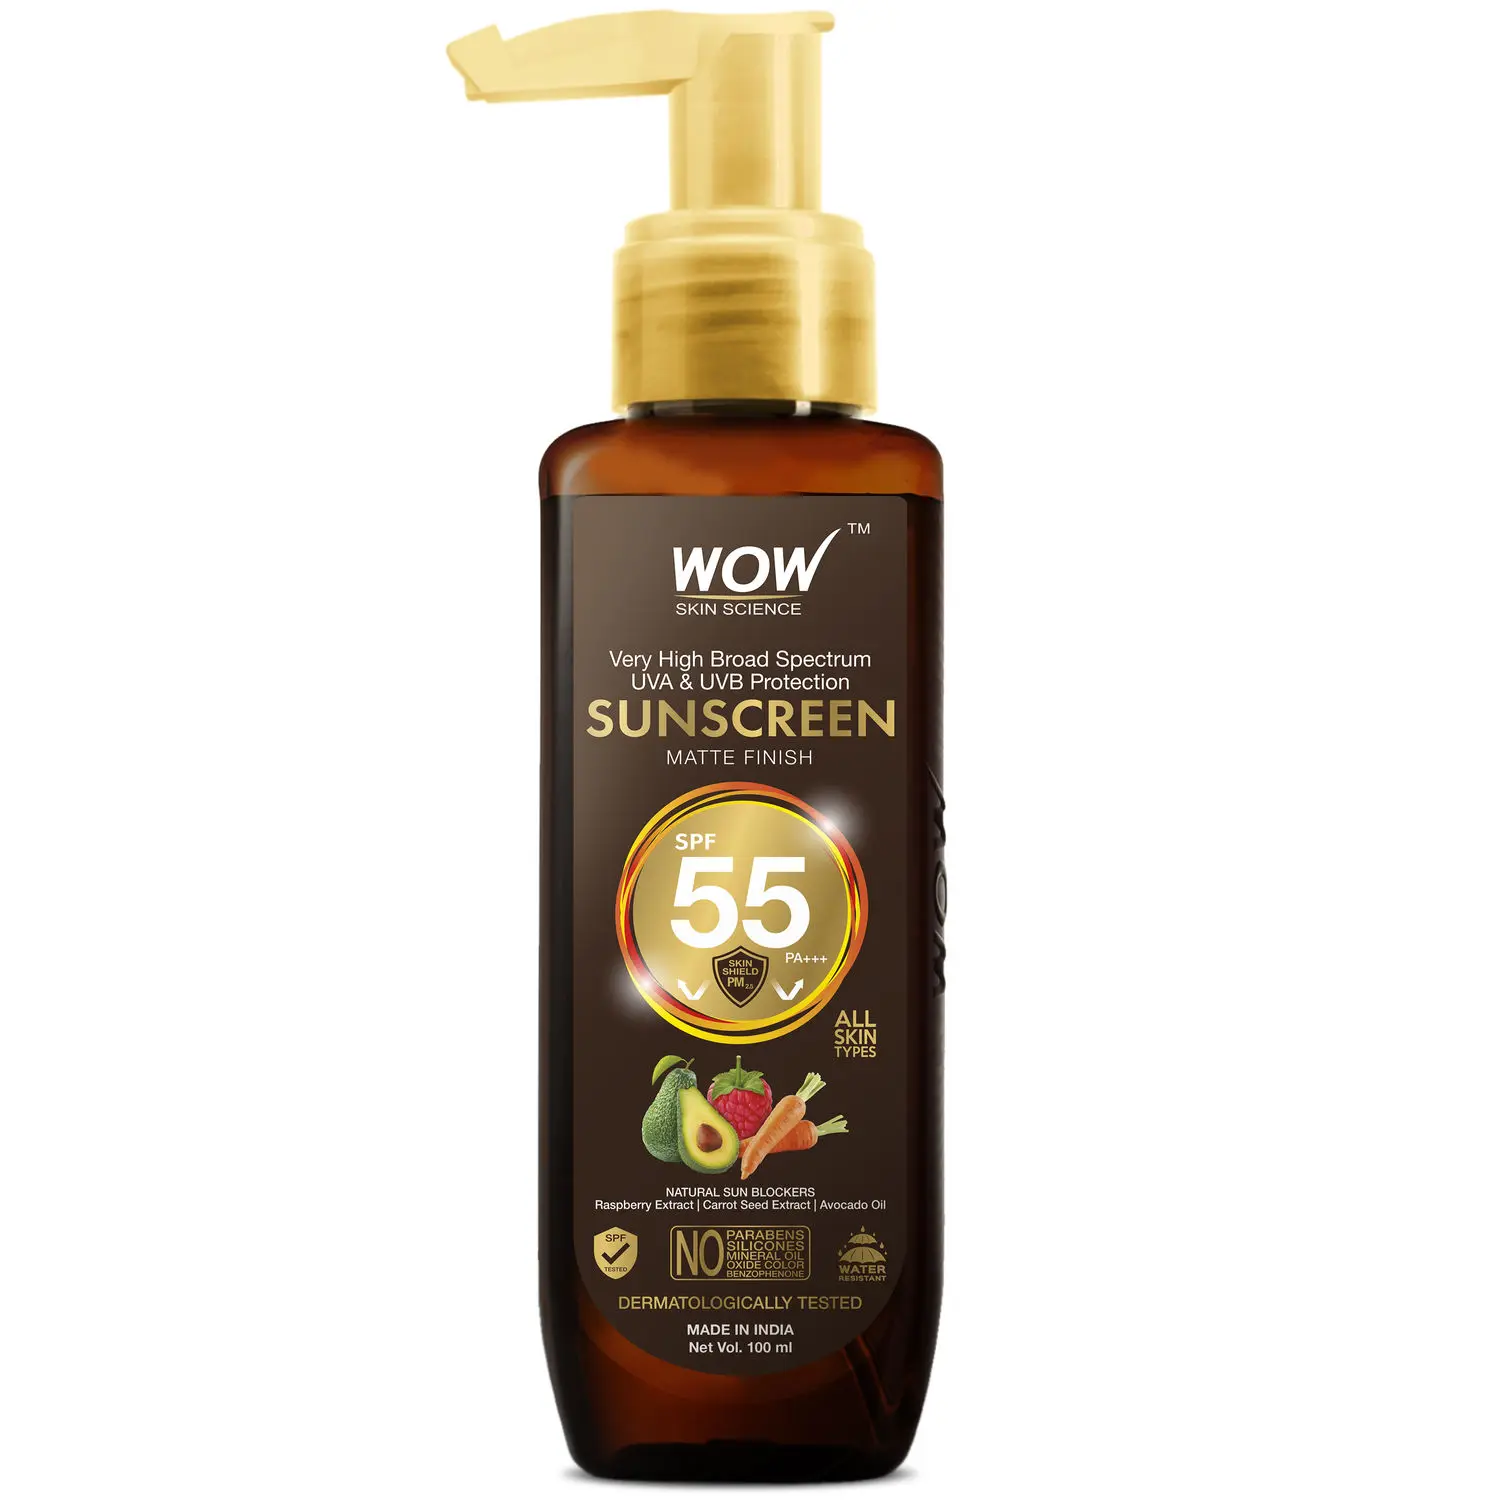 WOW Skin Science Sunscreen Matte Finish - SPF 55 PA+++ - Very High Broad Spectrum - UVA &UVB Protection - Quick Absorb - No Parabens, Silicones, Mineral Oil, Oxide, Color & Benzophenone - 100mL